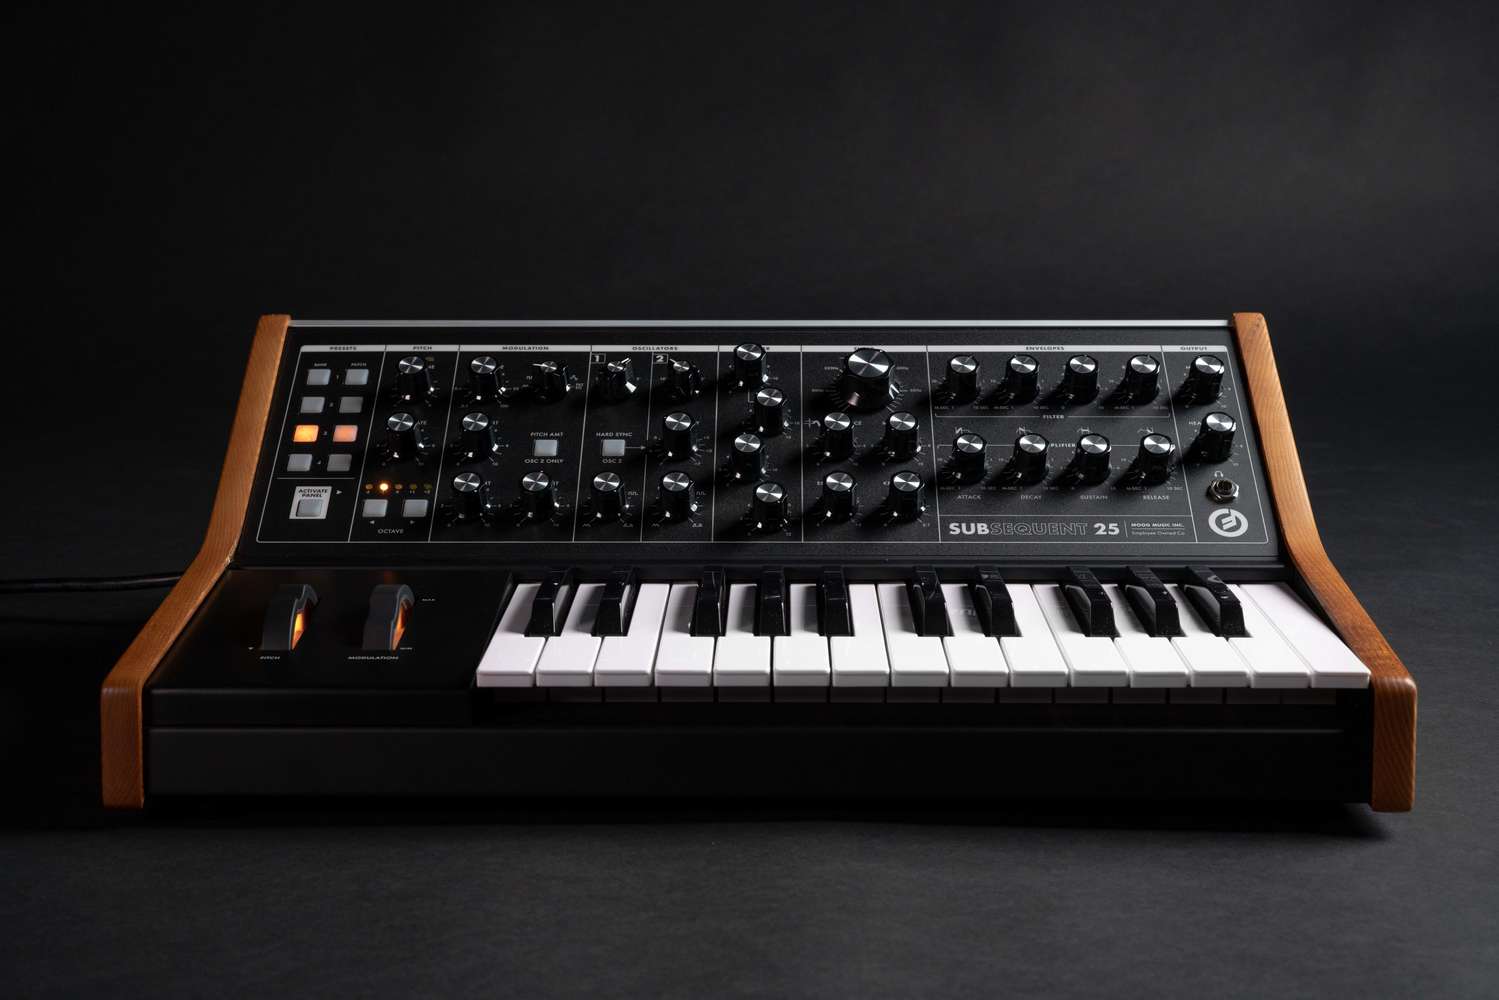 Moog unveil their smallest synthesizer ever to replace the Phatty